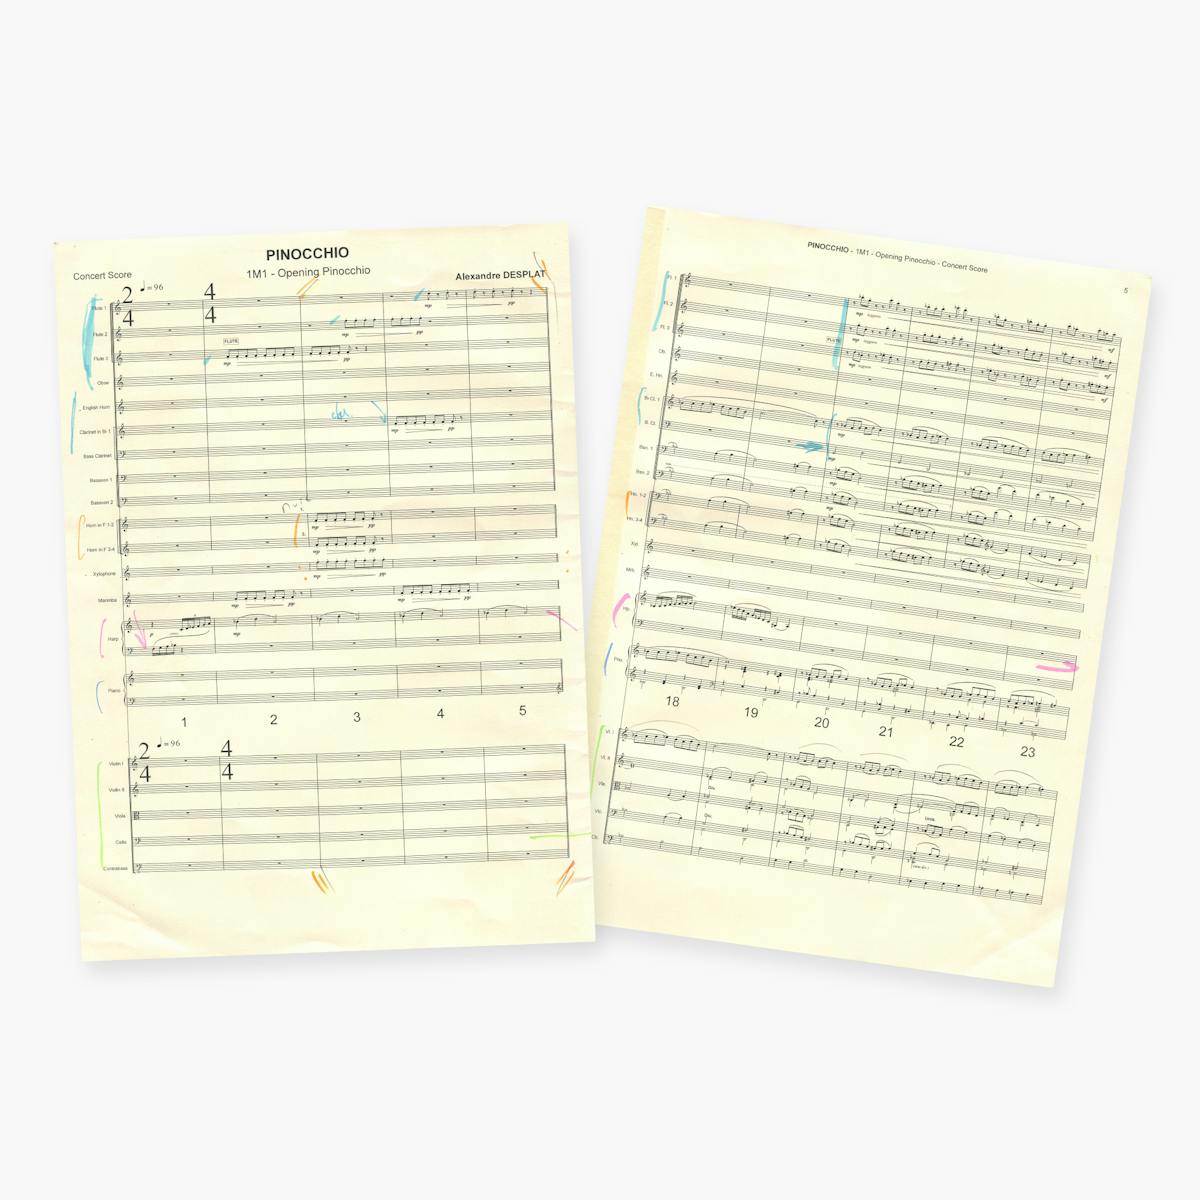 An annotated music sheet from Guillermo del Toro's Pinocchio.